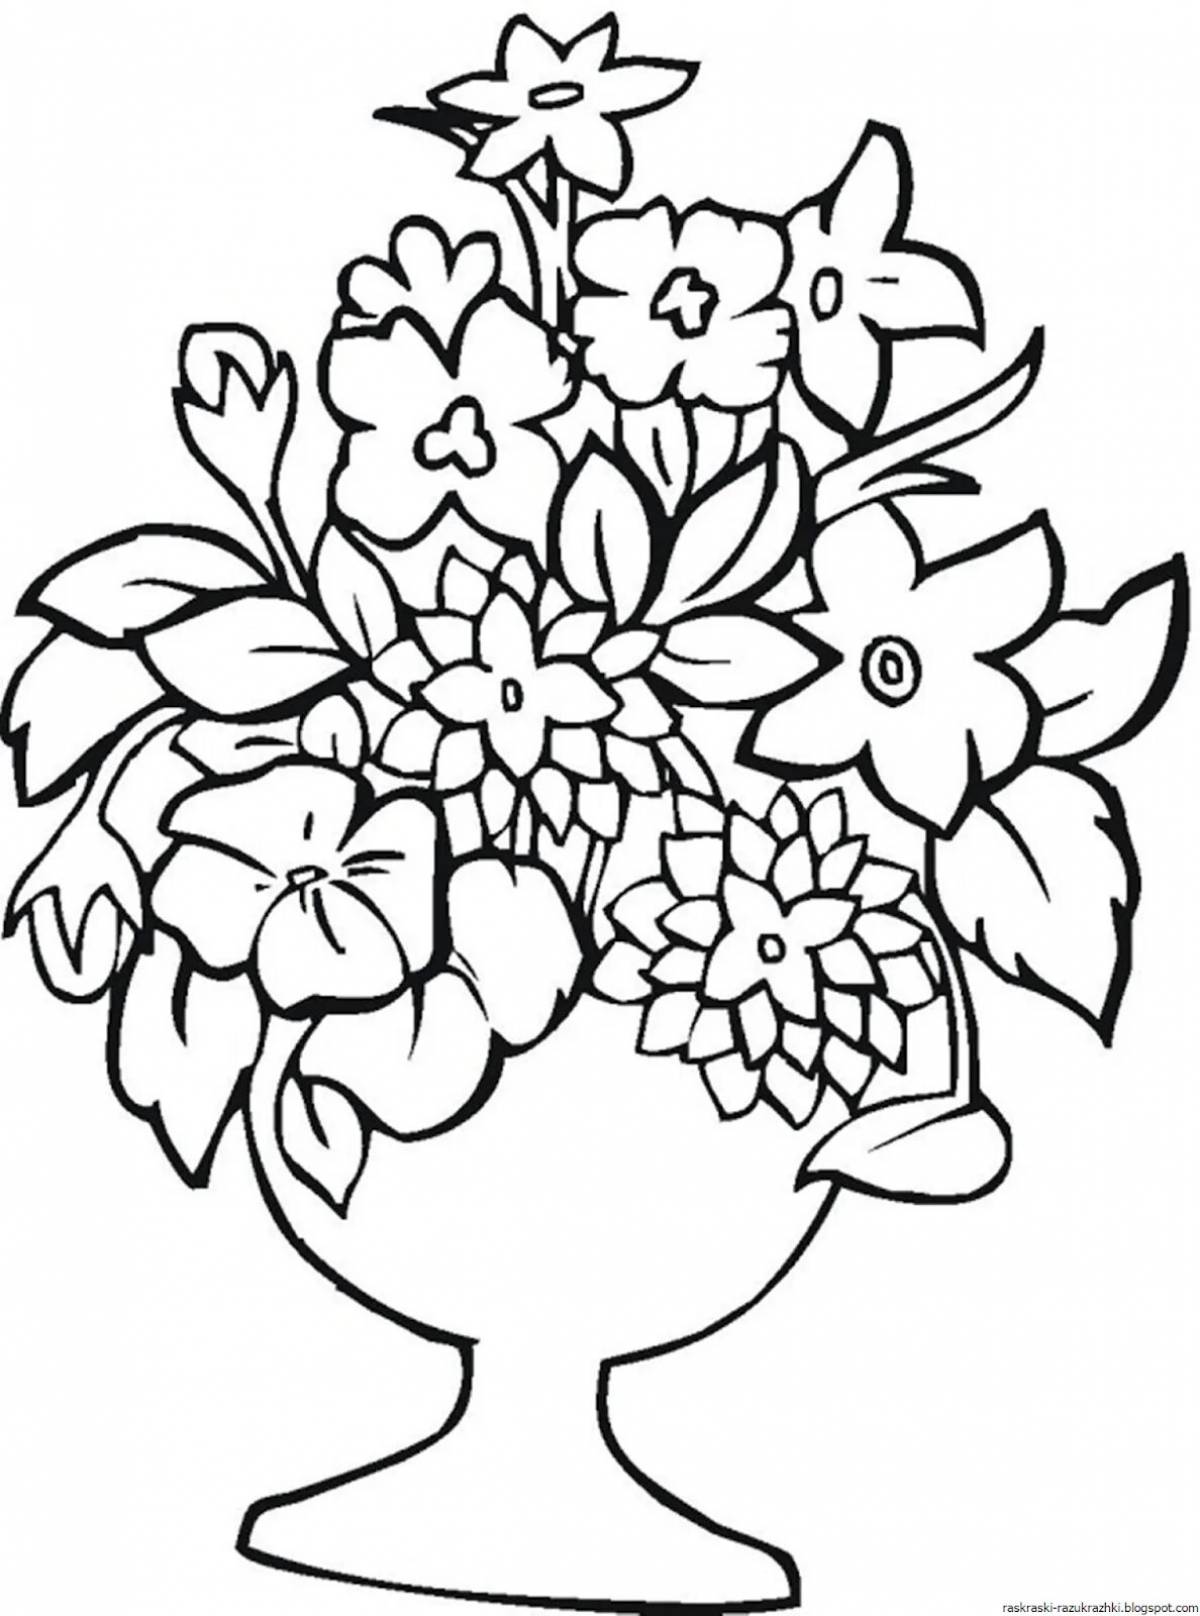 Fun coloring bouquets of flowers